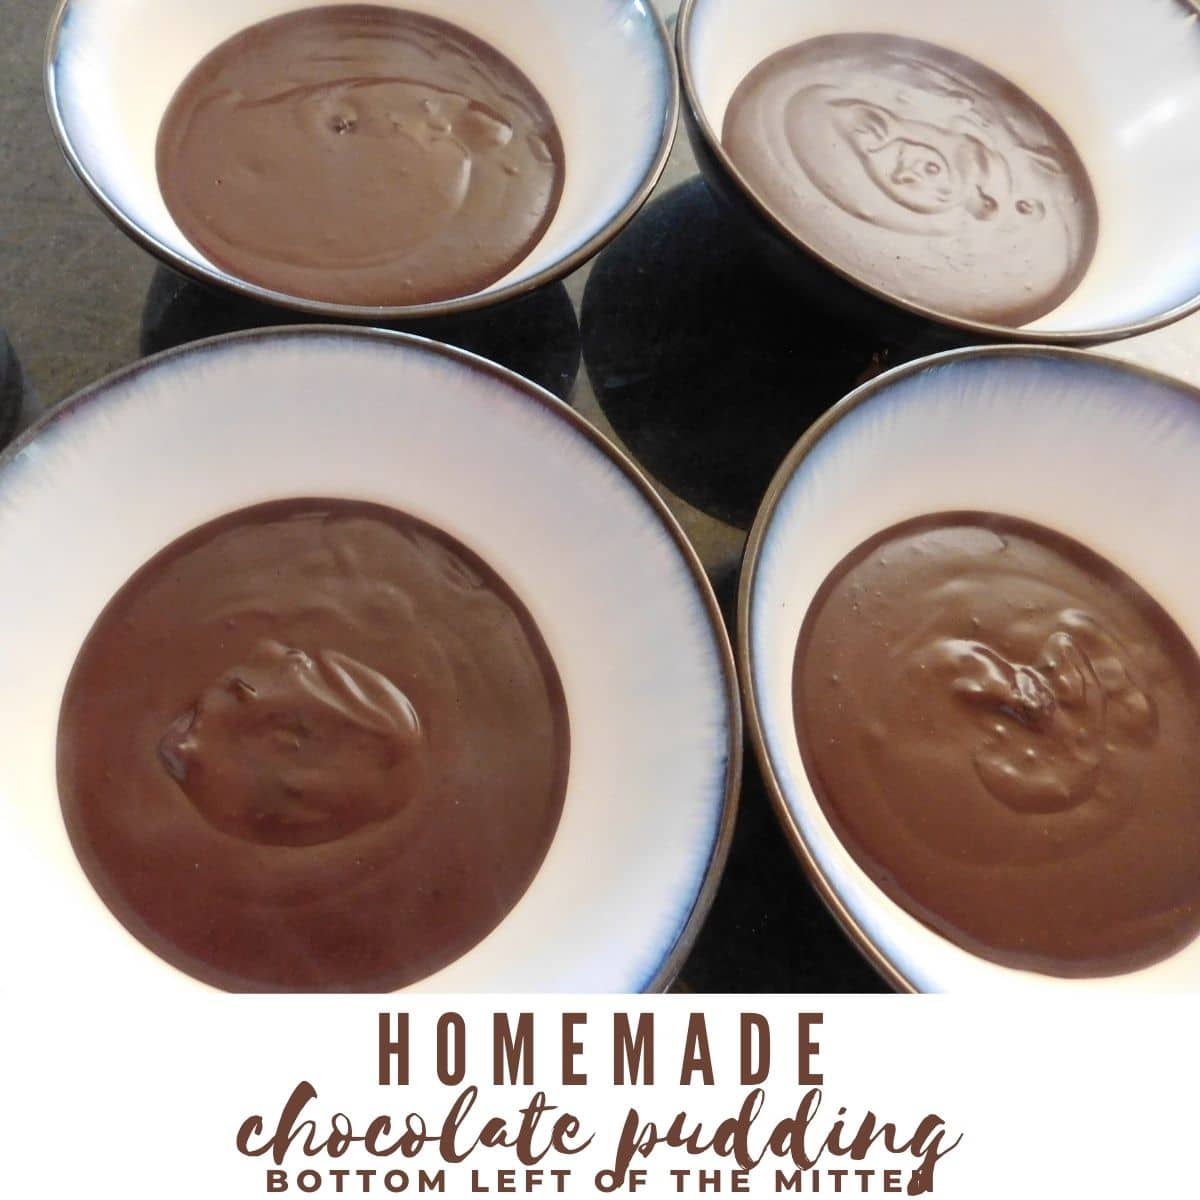 Homemade Chocolate Pudding in bowls ready to eat!